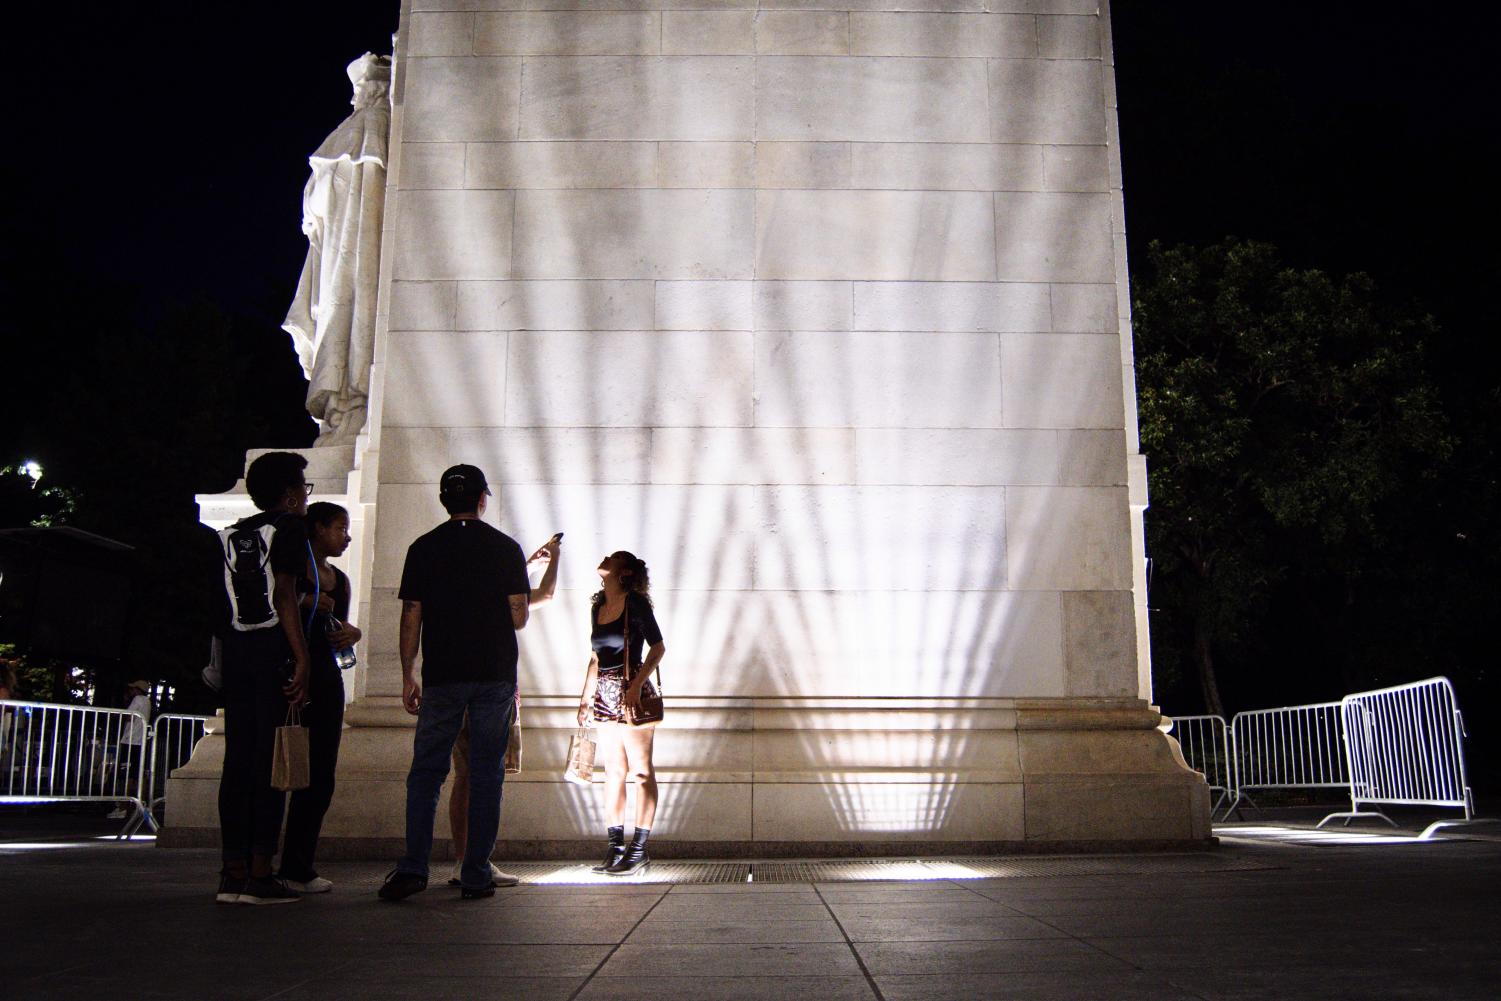 A woman stands alongside the Washington Square Arch at night. She is wearing a long-sleeved black top and brown shorts.